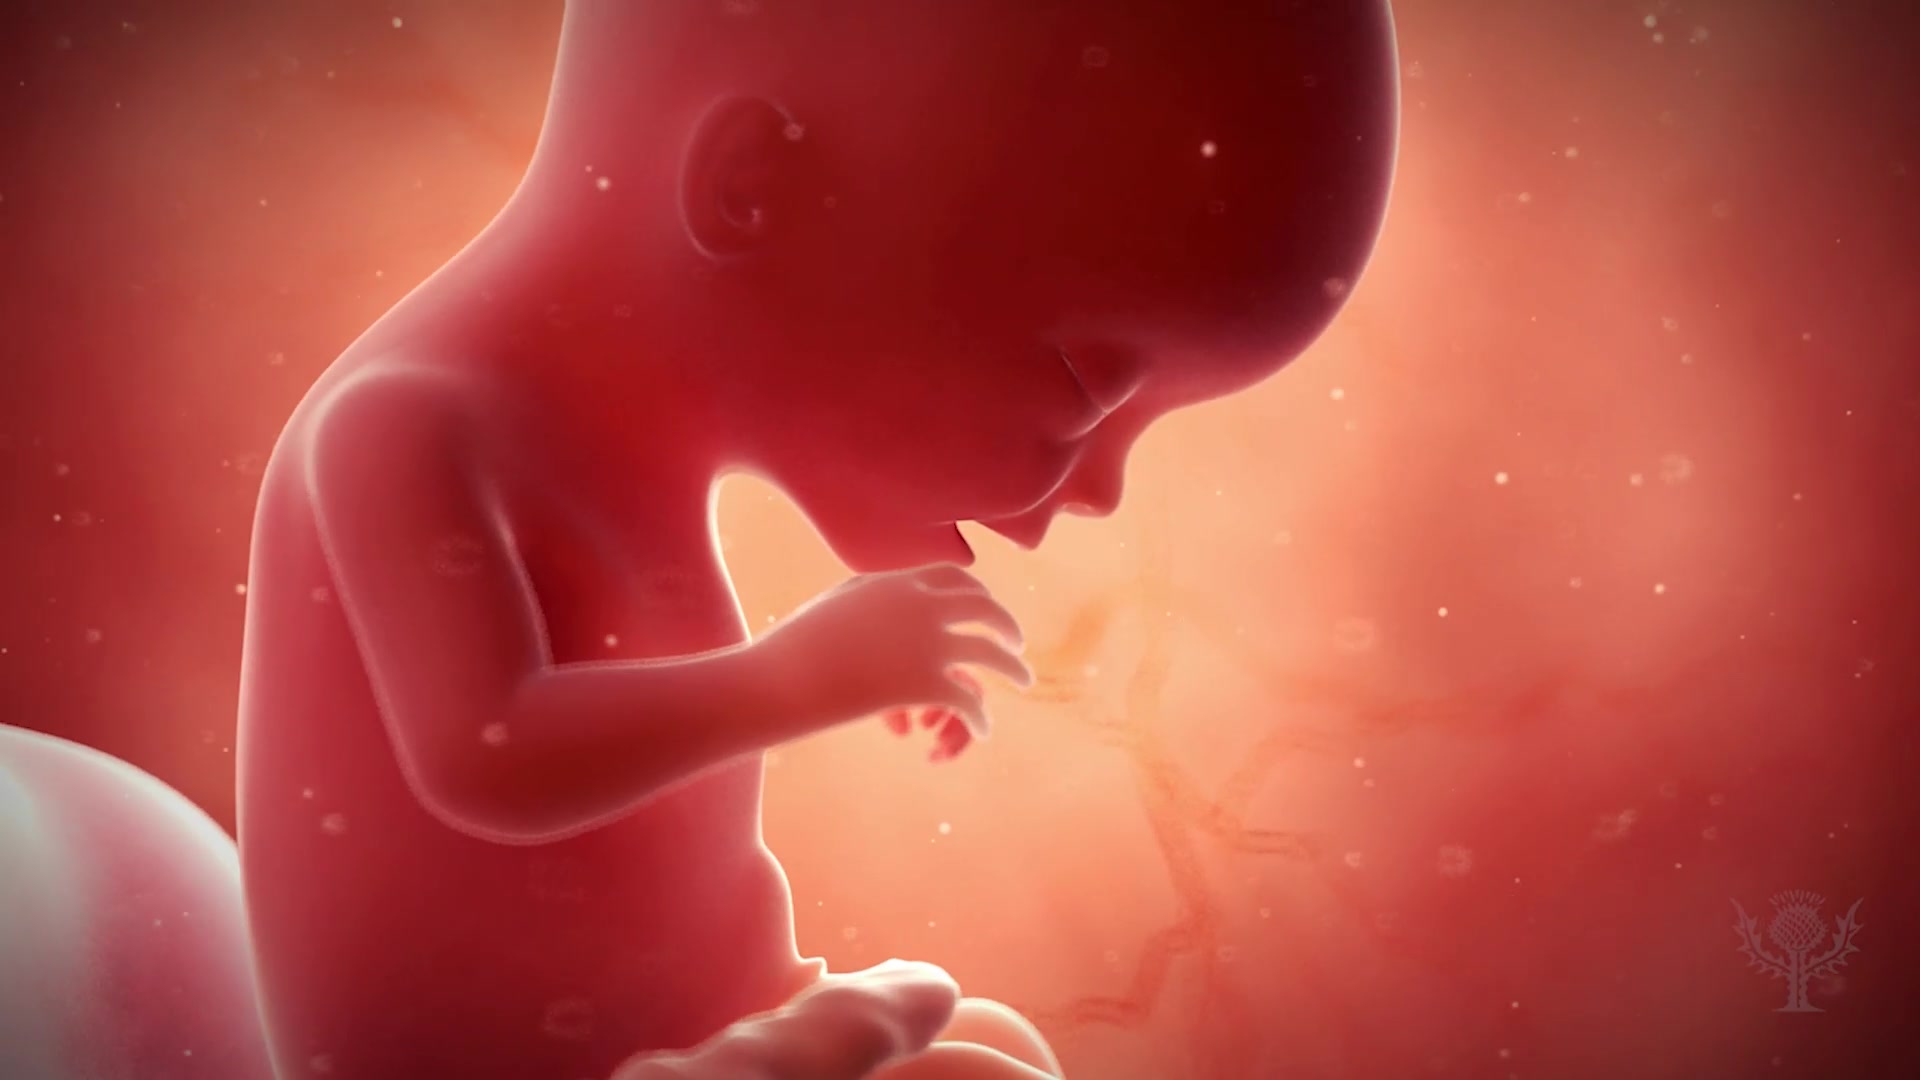 Learn About Human Embryonic And Fetal Development, From Fertilization To  Birth | Alexander Street, part of Clarivate